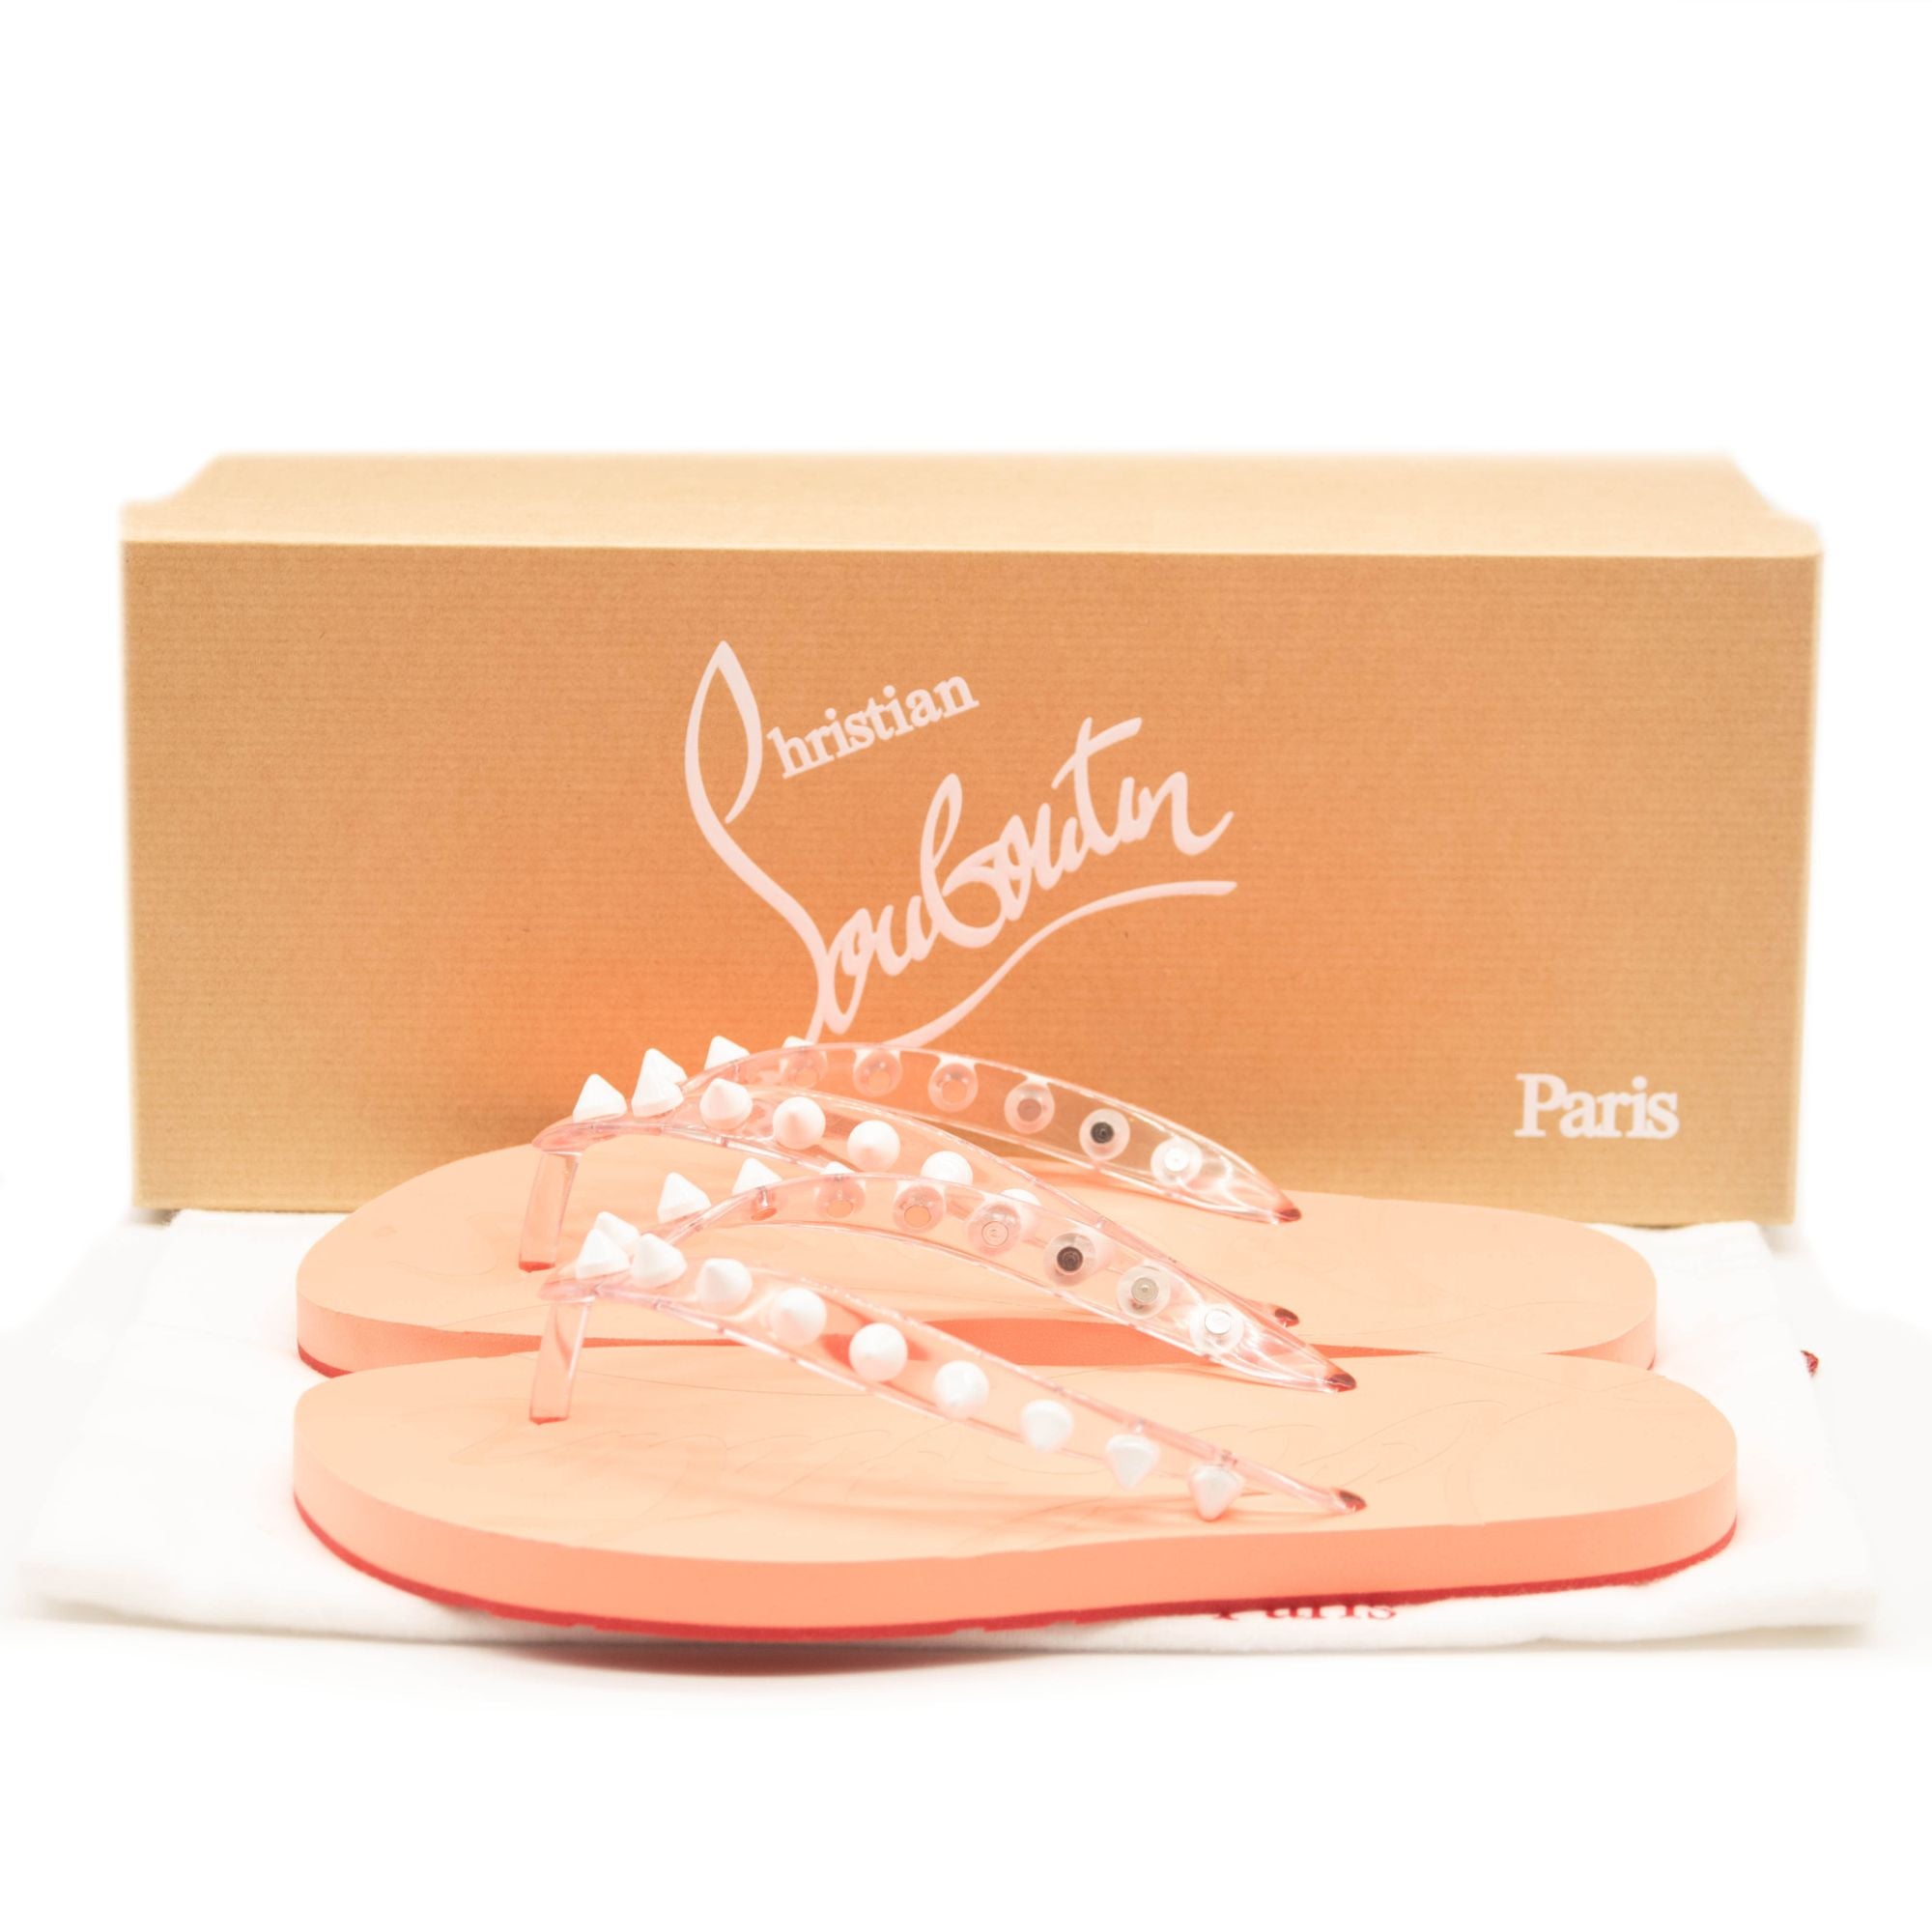 Christian Louboutin DADDY POOL DONNA Spiked Studded Flat Slide Sandal Shoes  $750